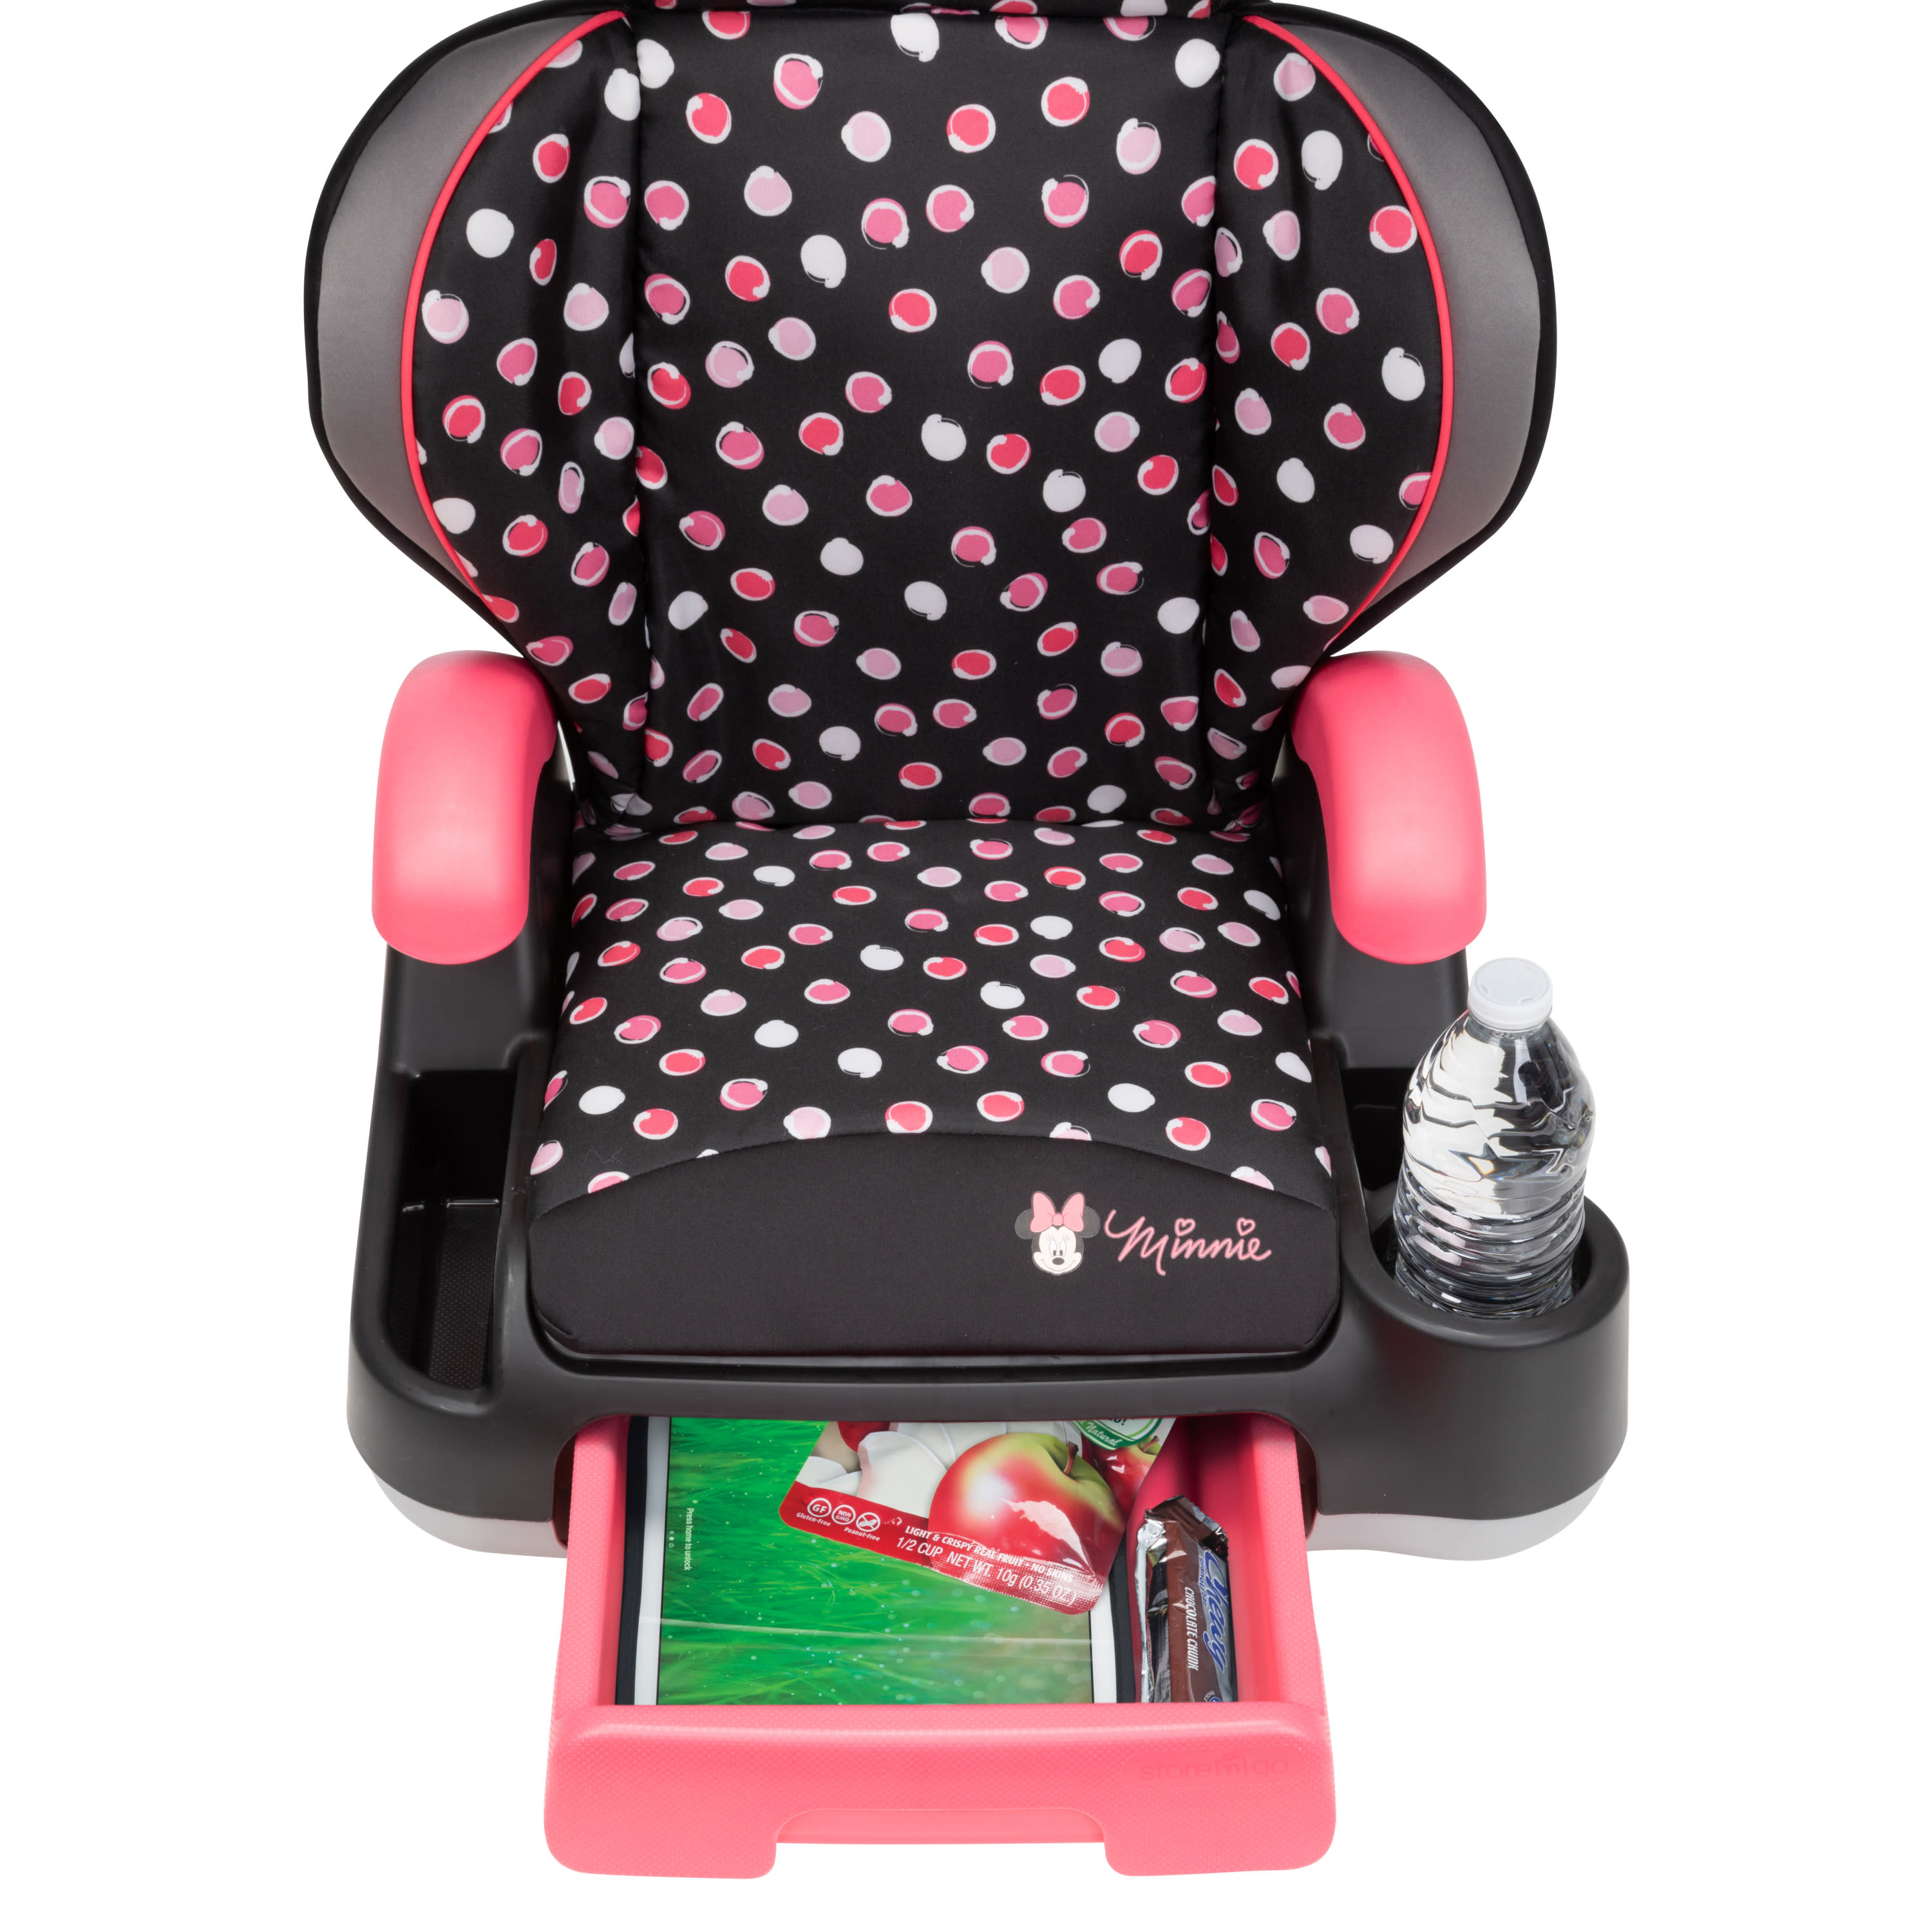 Disney Baby Store 'n Go Sport Booster Car Seat, Minnie Mash Up - image 13 of 21